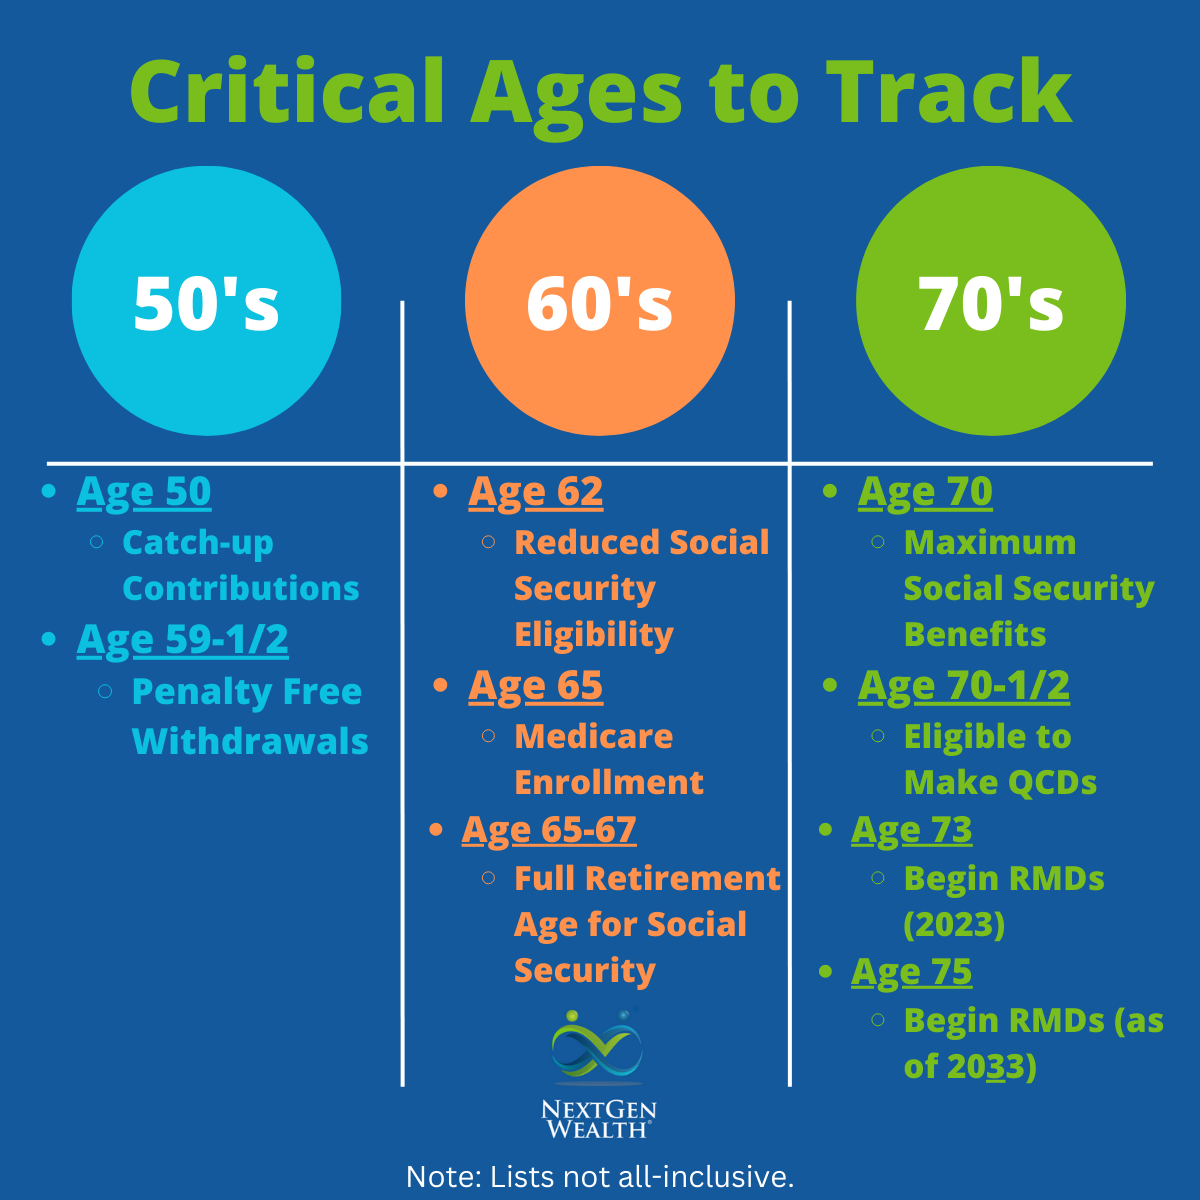 Critical Ages by Decade to Keep Track of in Retirement